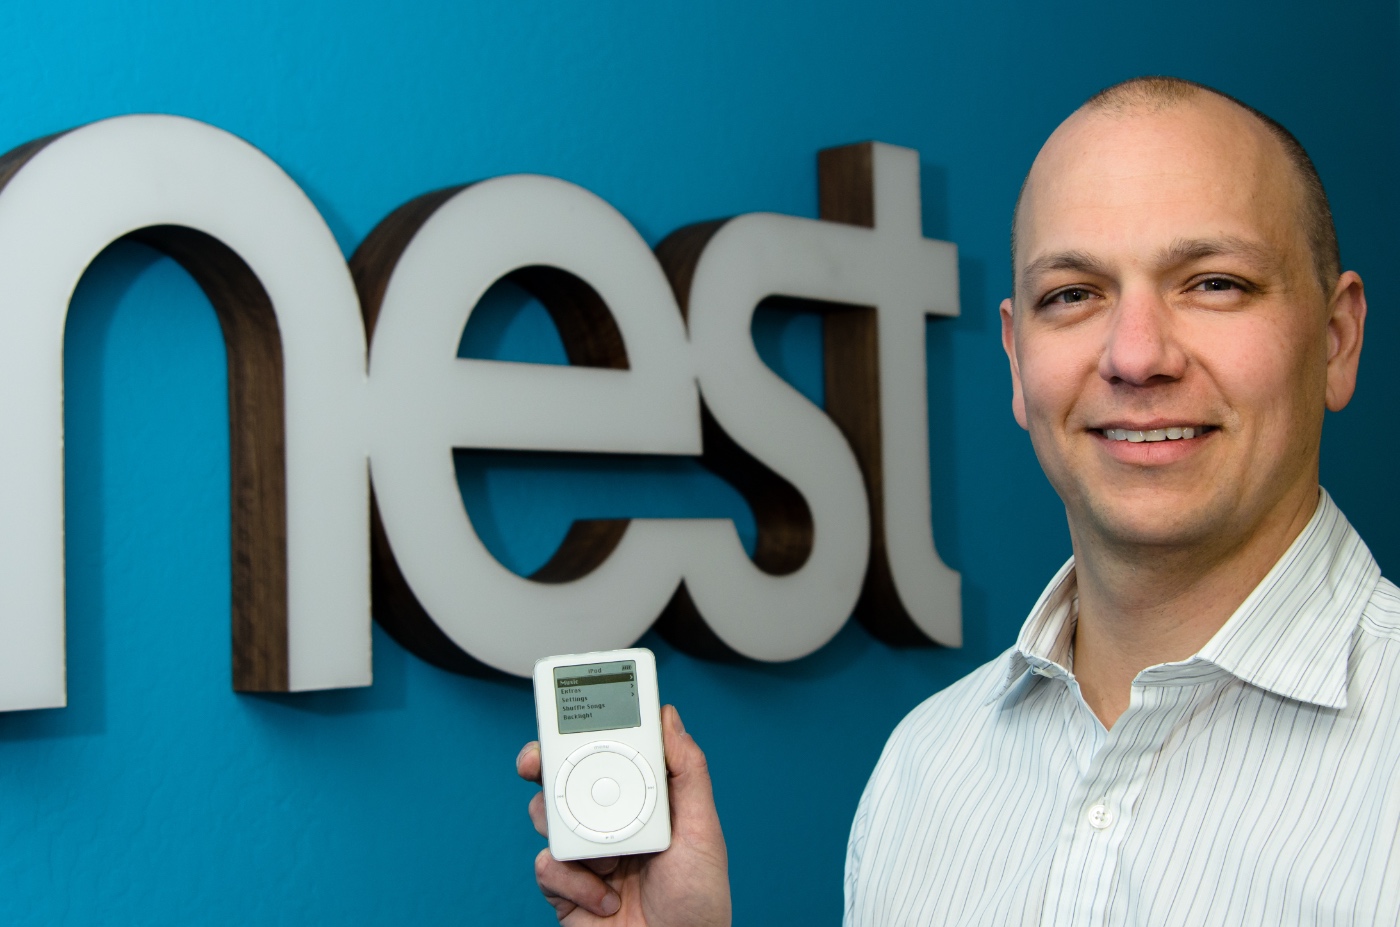 Former Apple executive Tony Fadell holds up an iPod in front of the logo of Nest, the smart home company he co-founded